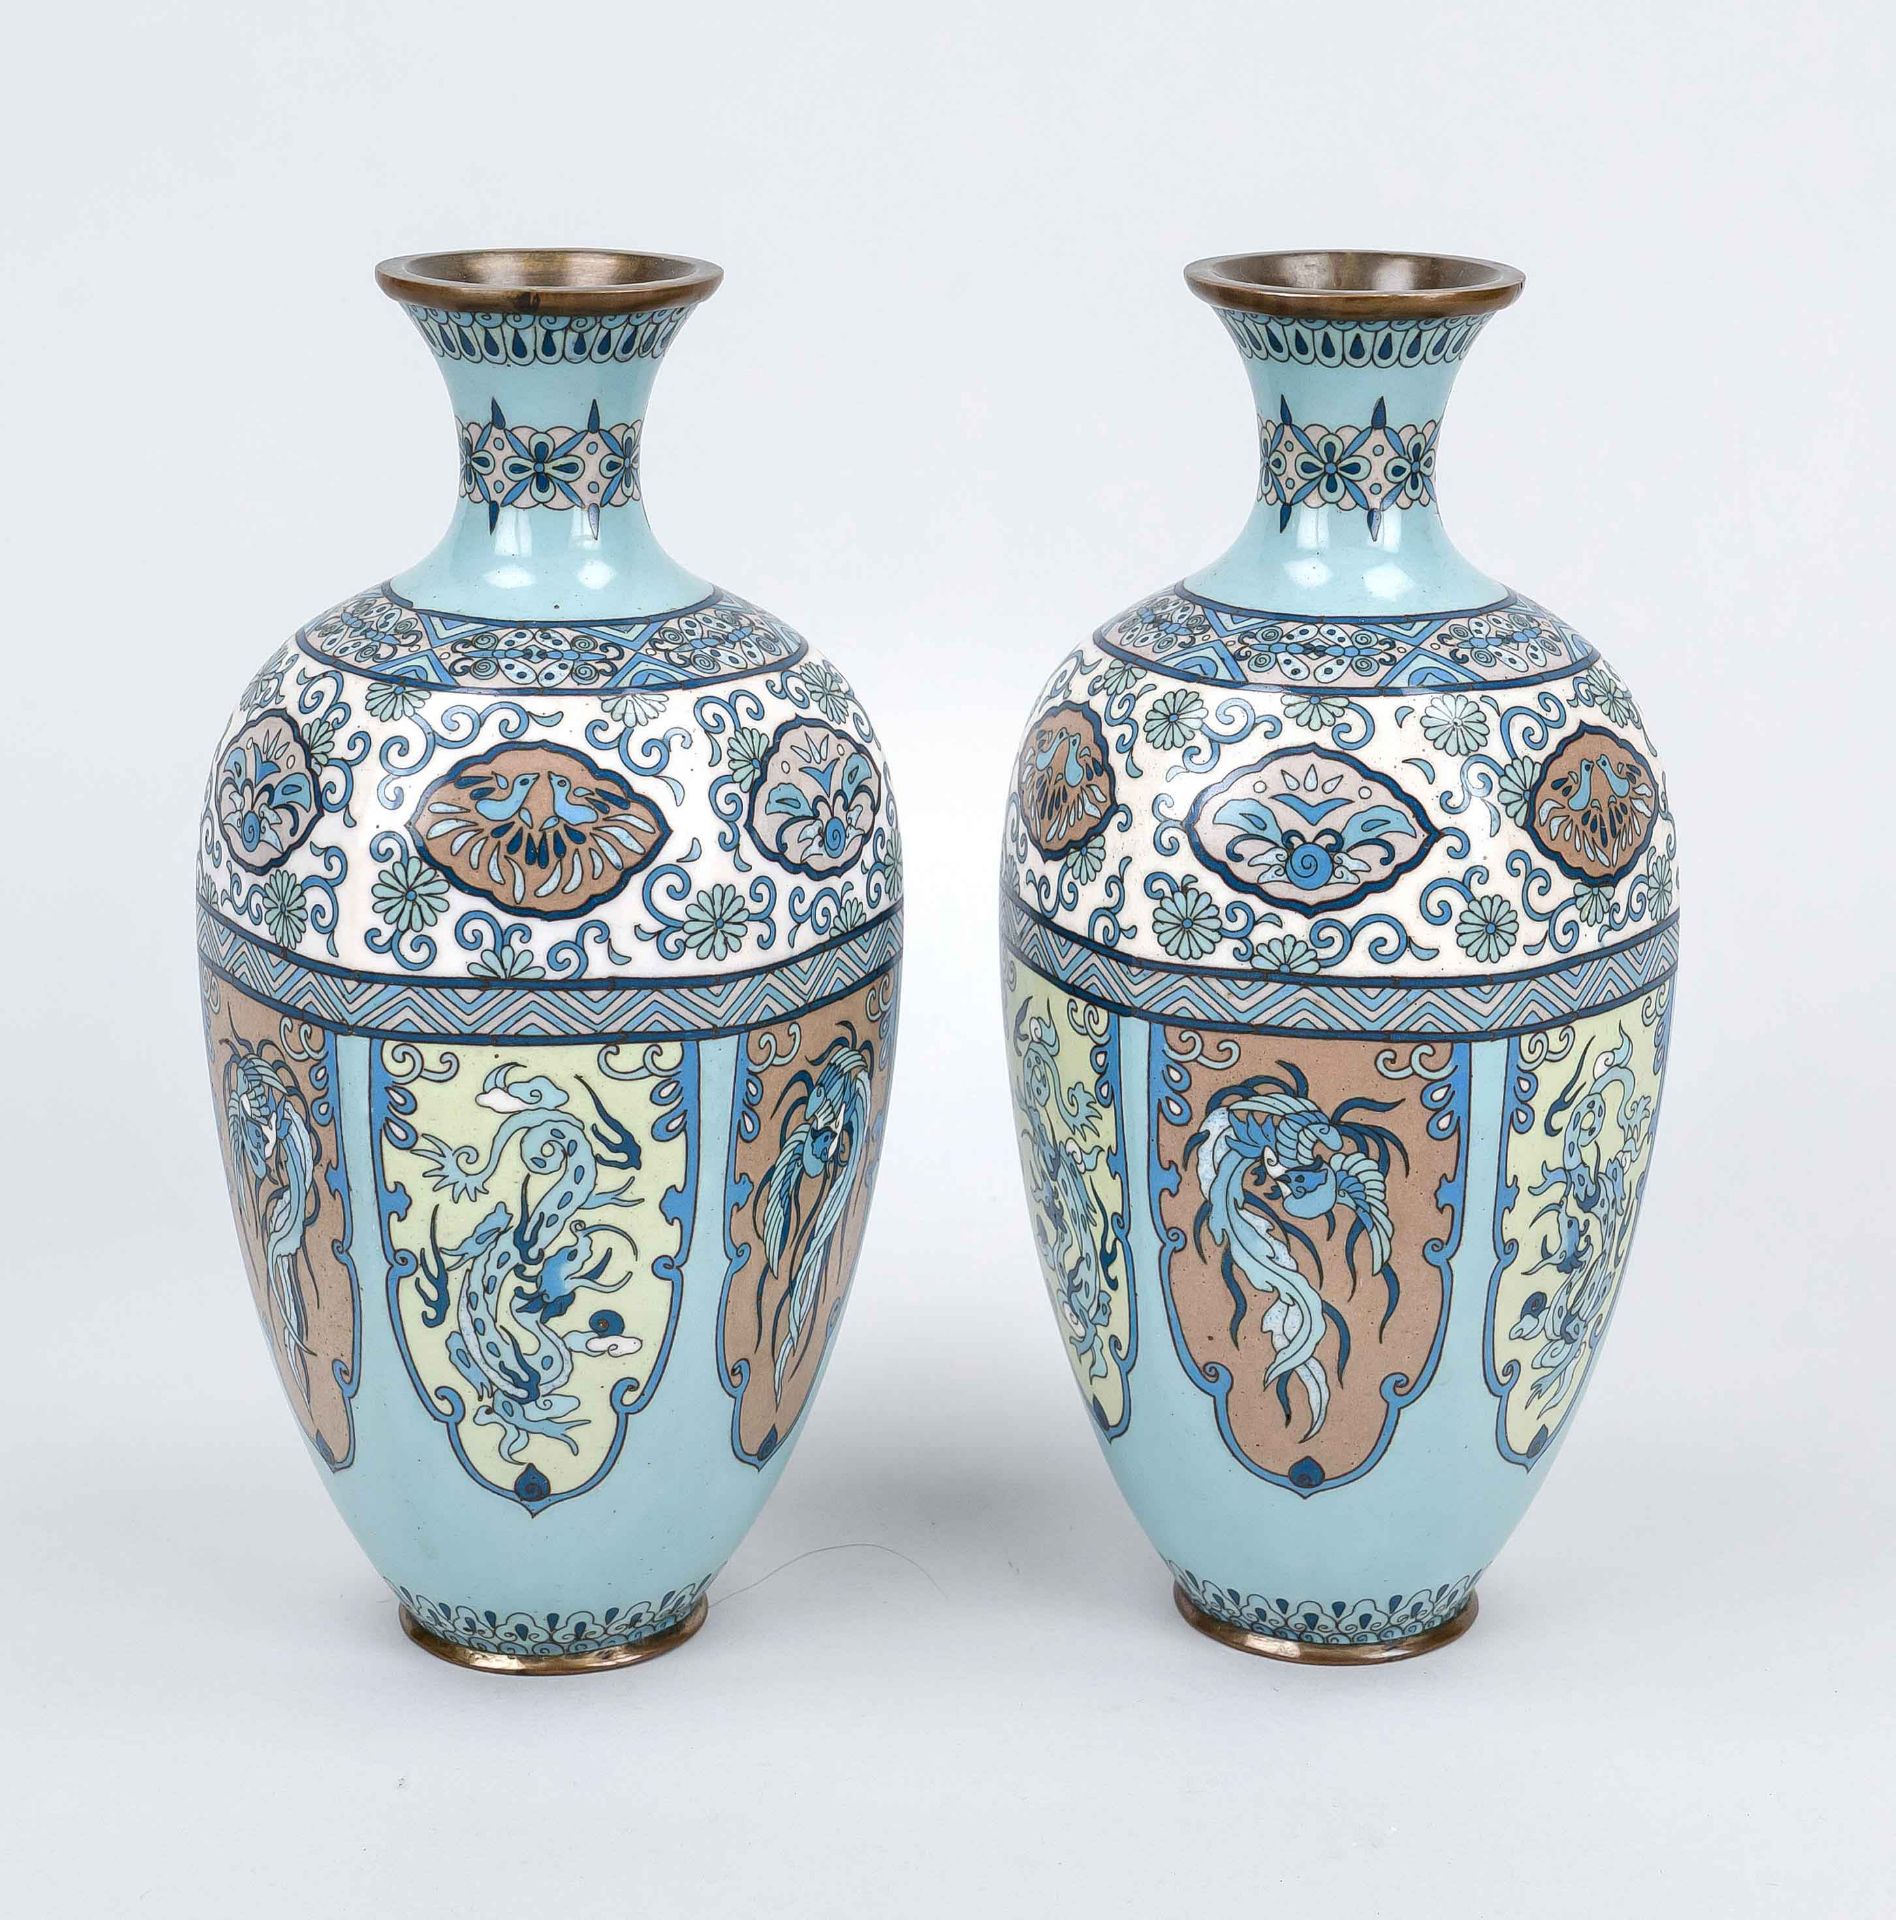 Pair of cloisonné vases, Japan c. 1900 (Meiji). Faceted body with retracted neck, rubbed and